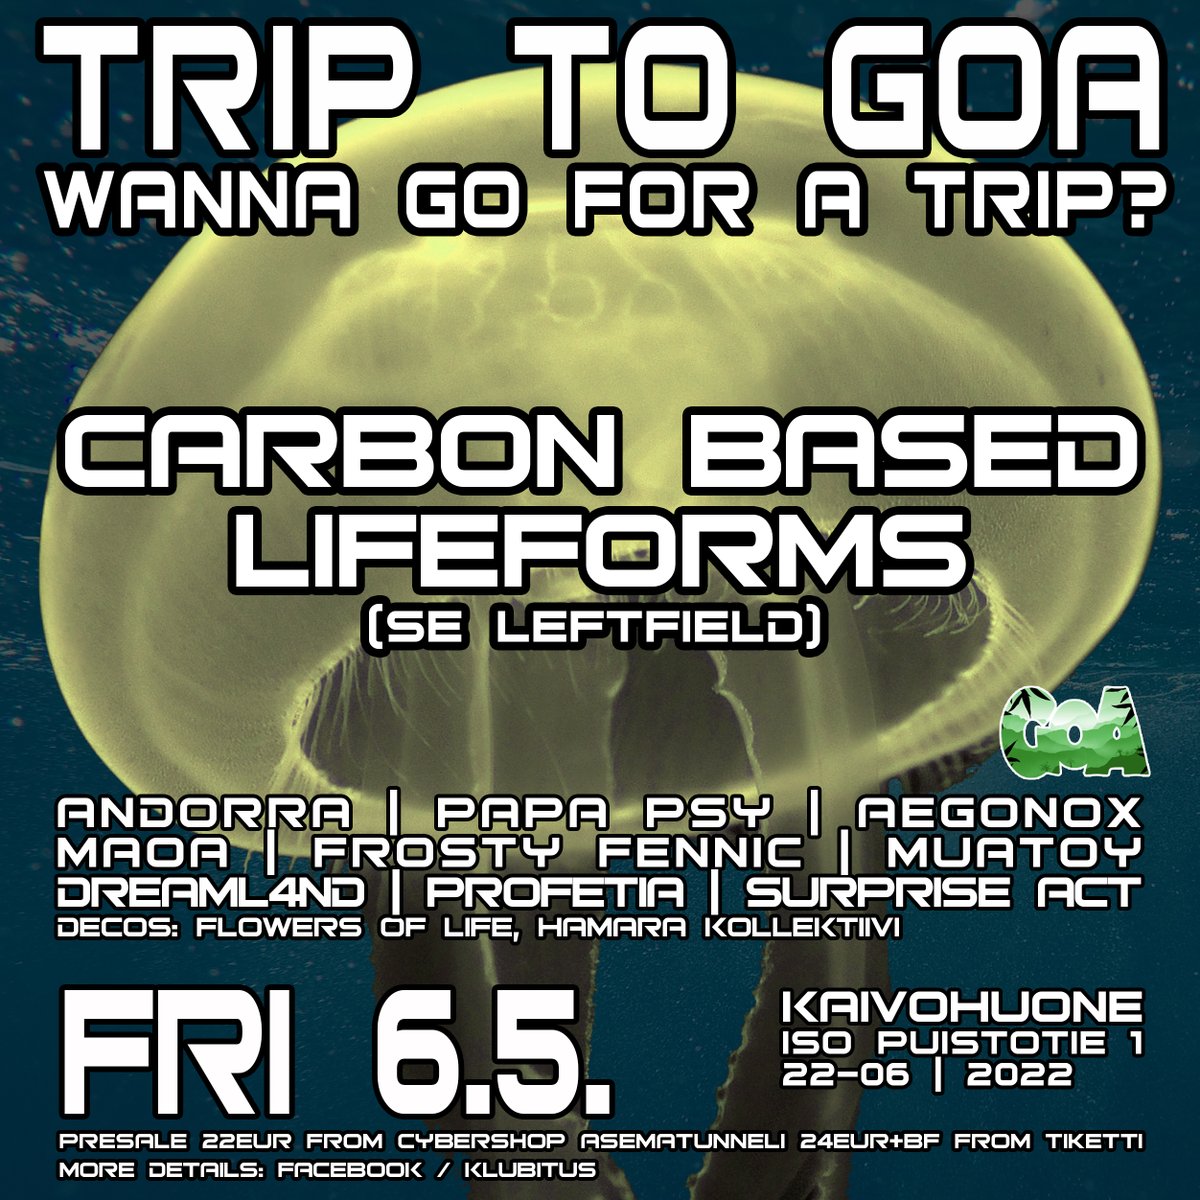 Today Trip To Goa w. Carbon Based Lifeforms at Helsinki. I am playing Aegonox together with Papa Psy and also some Dreaml4nd stuff.

Tiketti tickets here:

https://t.co/iIcTJTS9pZ https://t.co/jWvwT5whPS